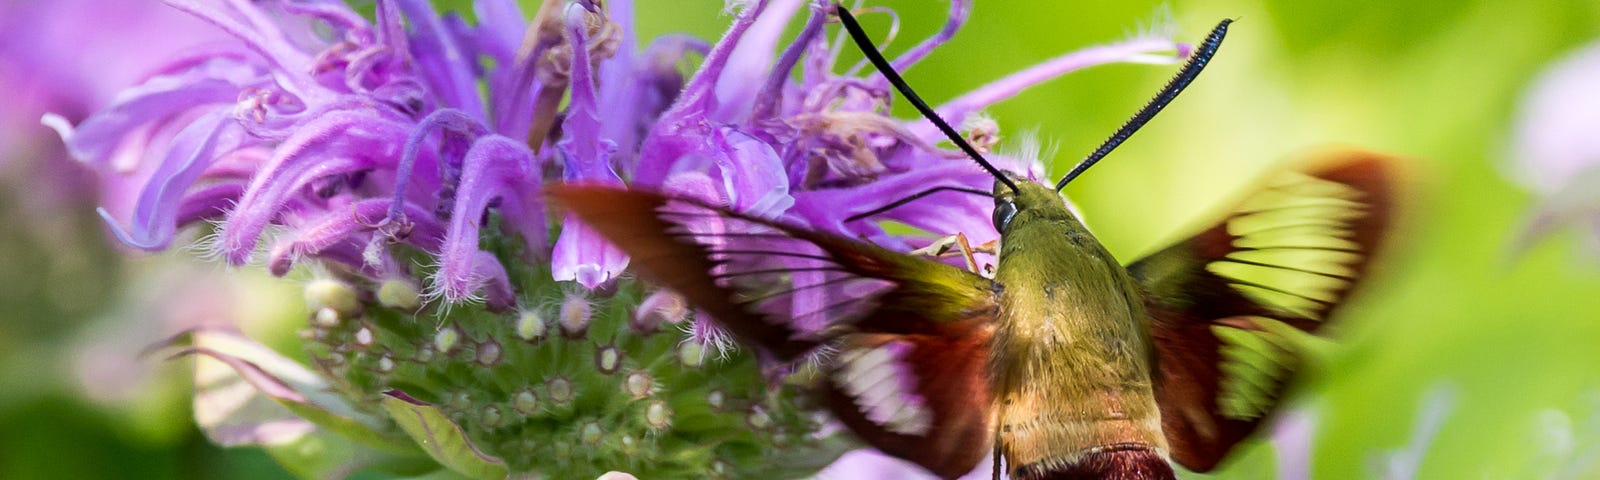 Snowberry clearwing moth.